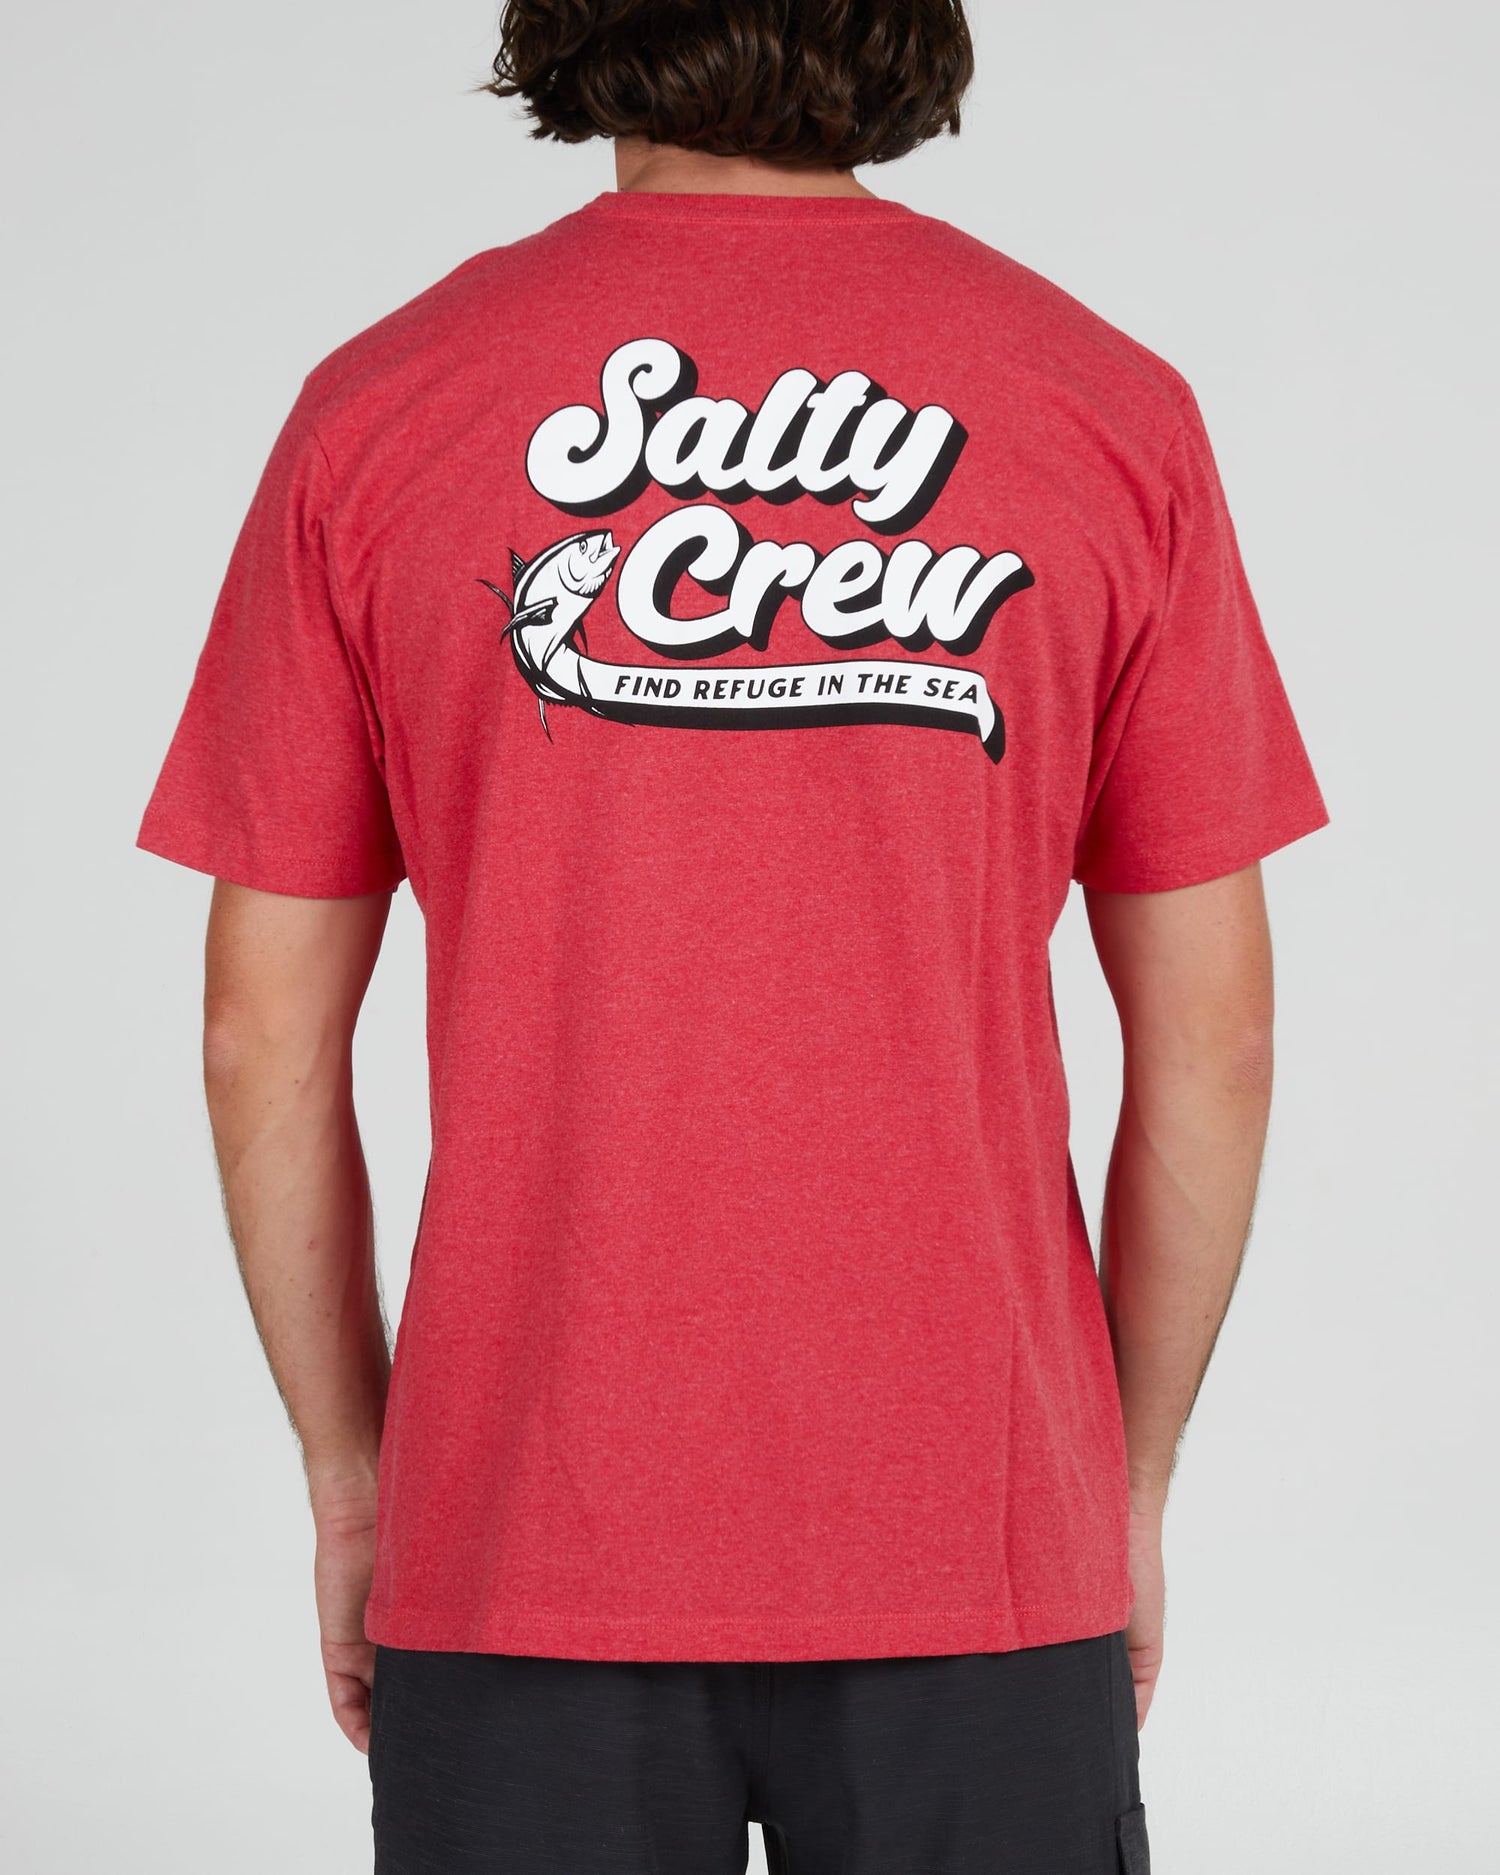 Salty crew T-SHIRTS S/S SWIFT WATER STANDARD S/S TEE - Red Heather in Red Heather